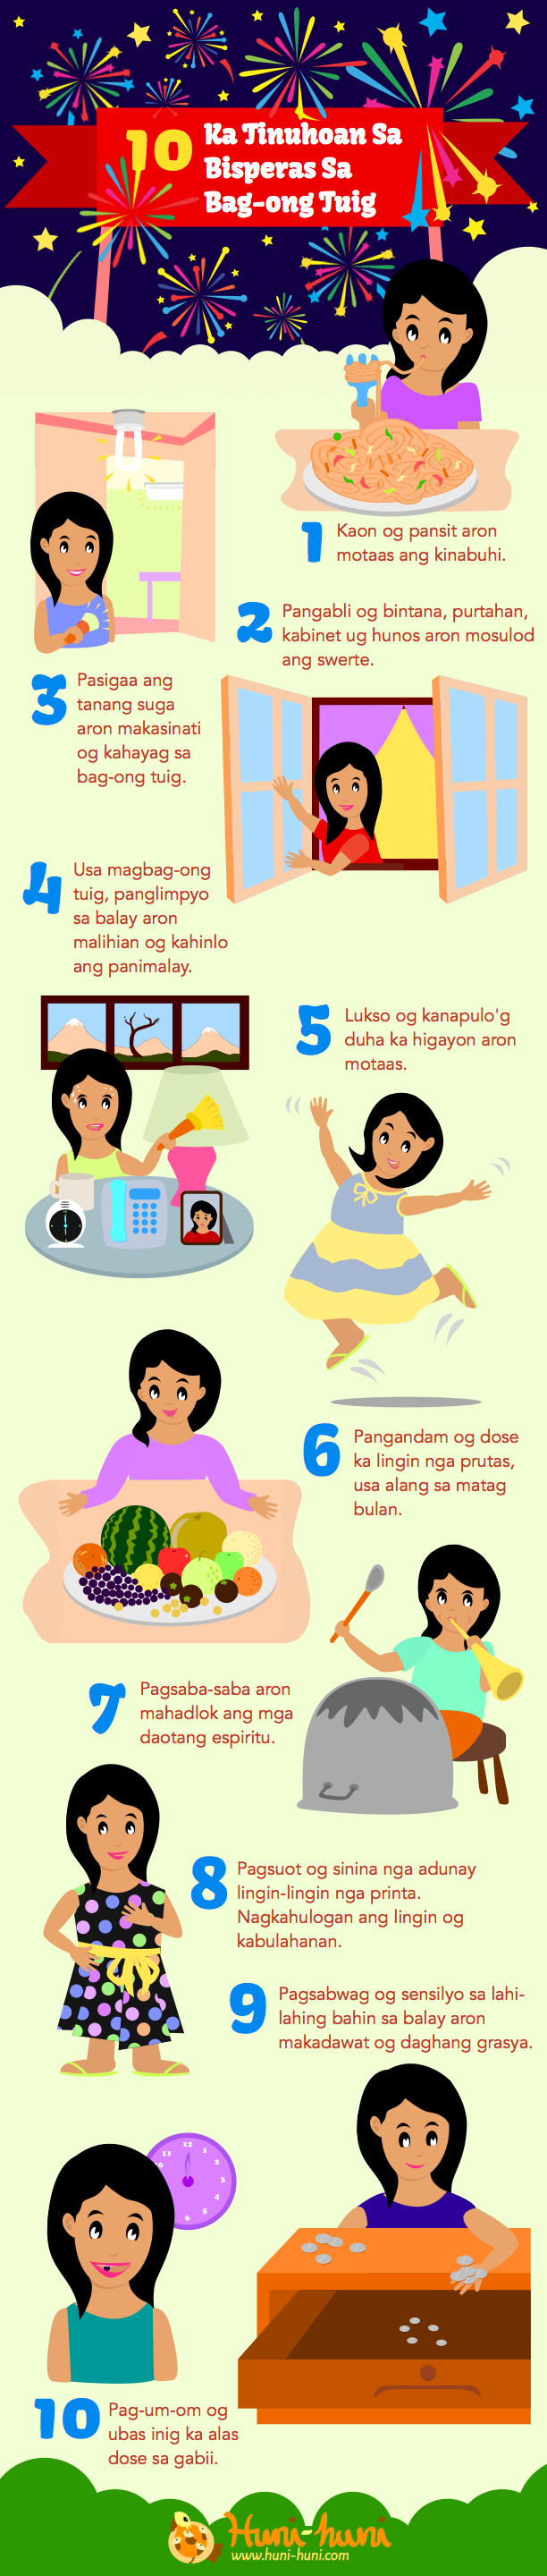 Infographic New Years Eve Superstitions in thePhil